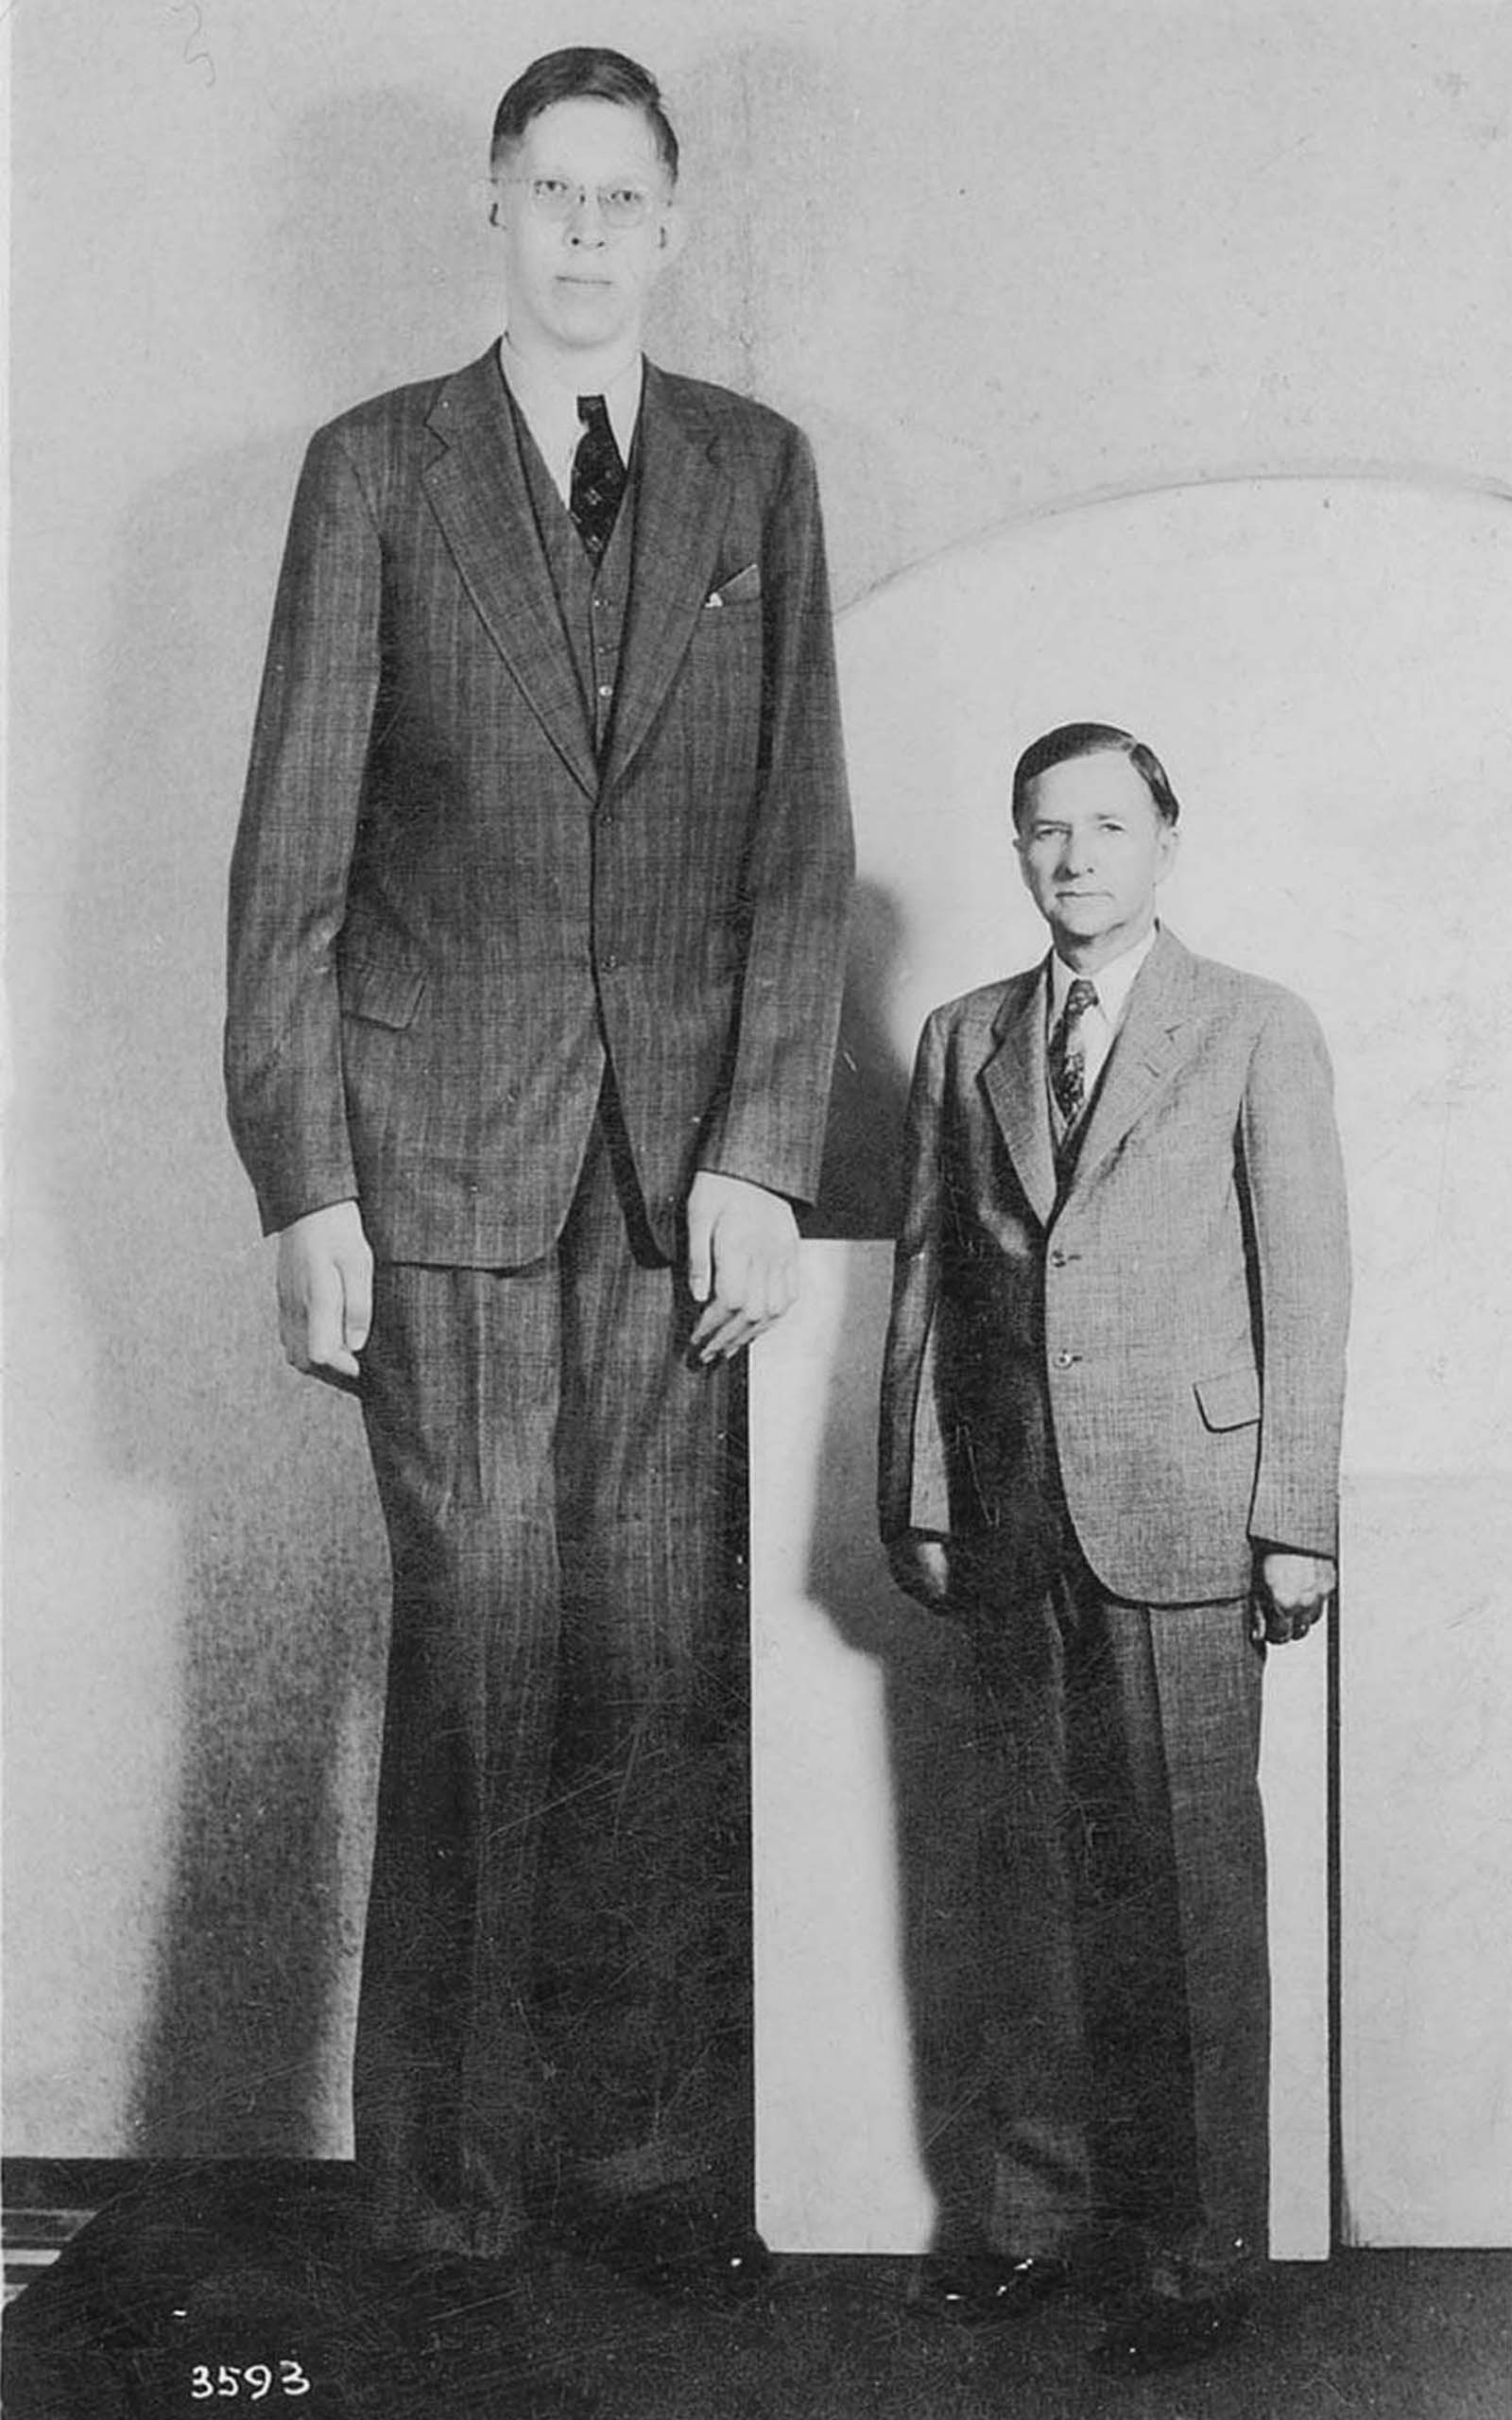 Wadlow with his father.